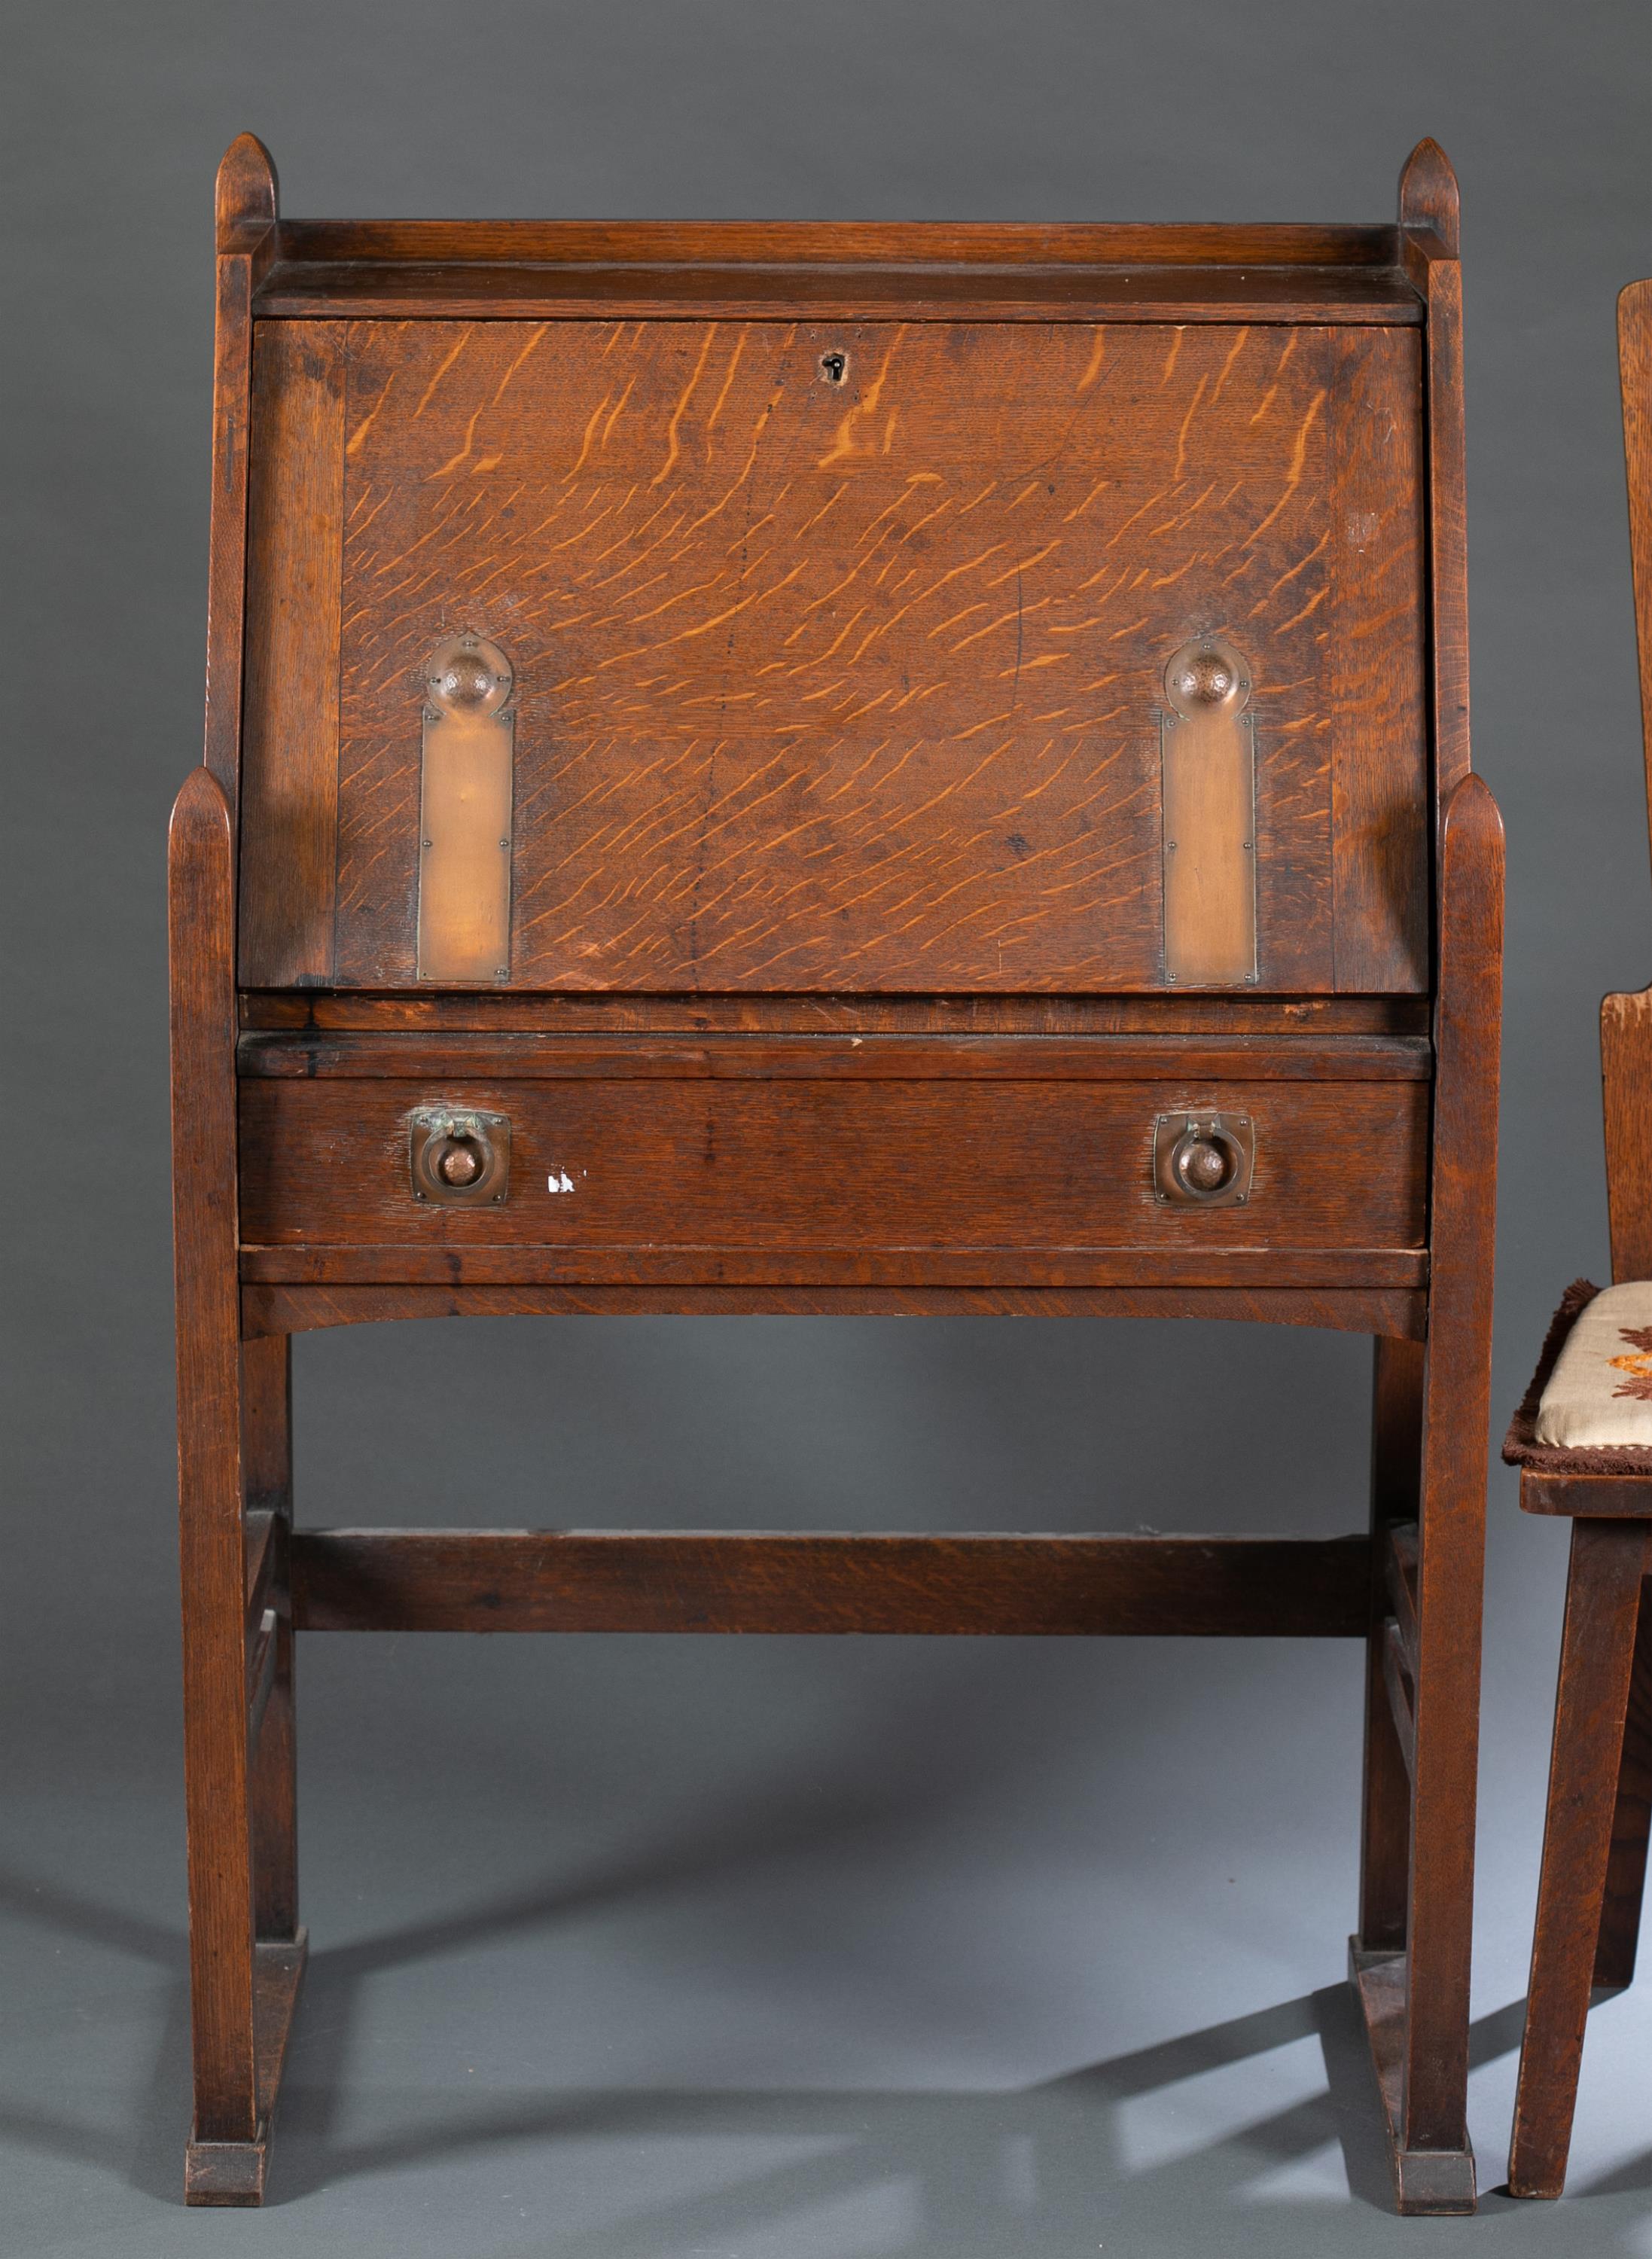 American Arts & Crafts Stickley Bros desk & chair - Image 2 of 8